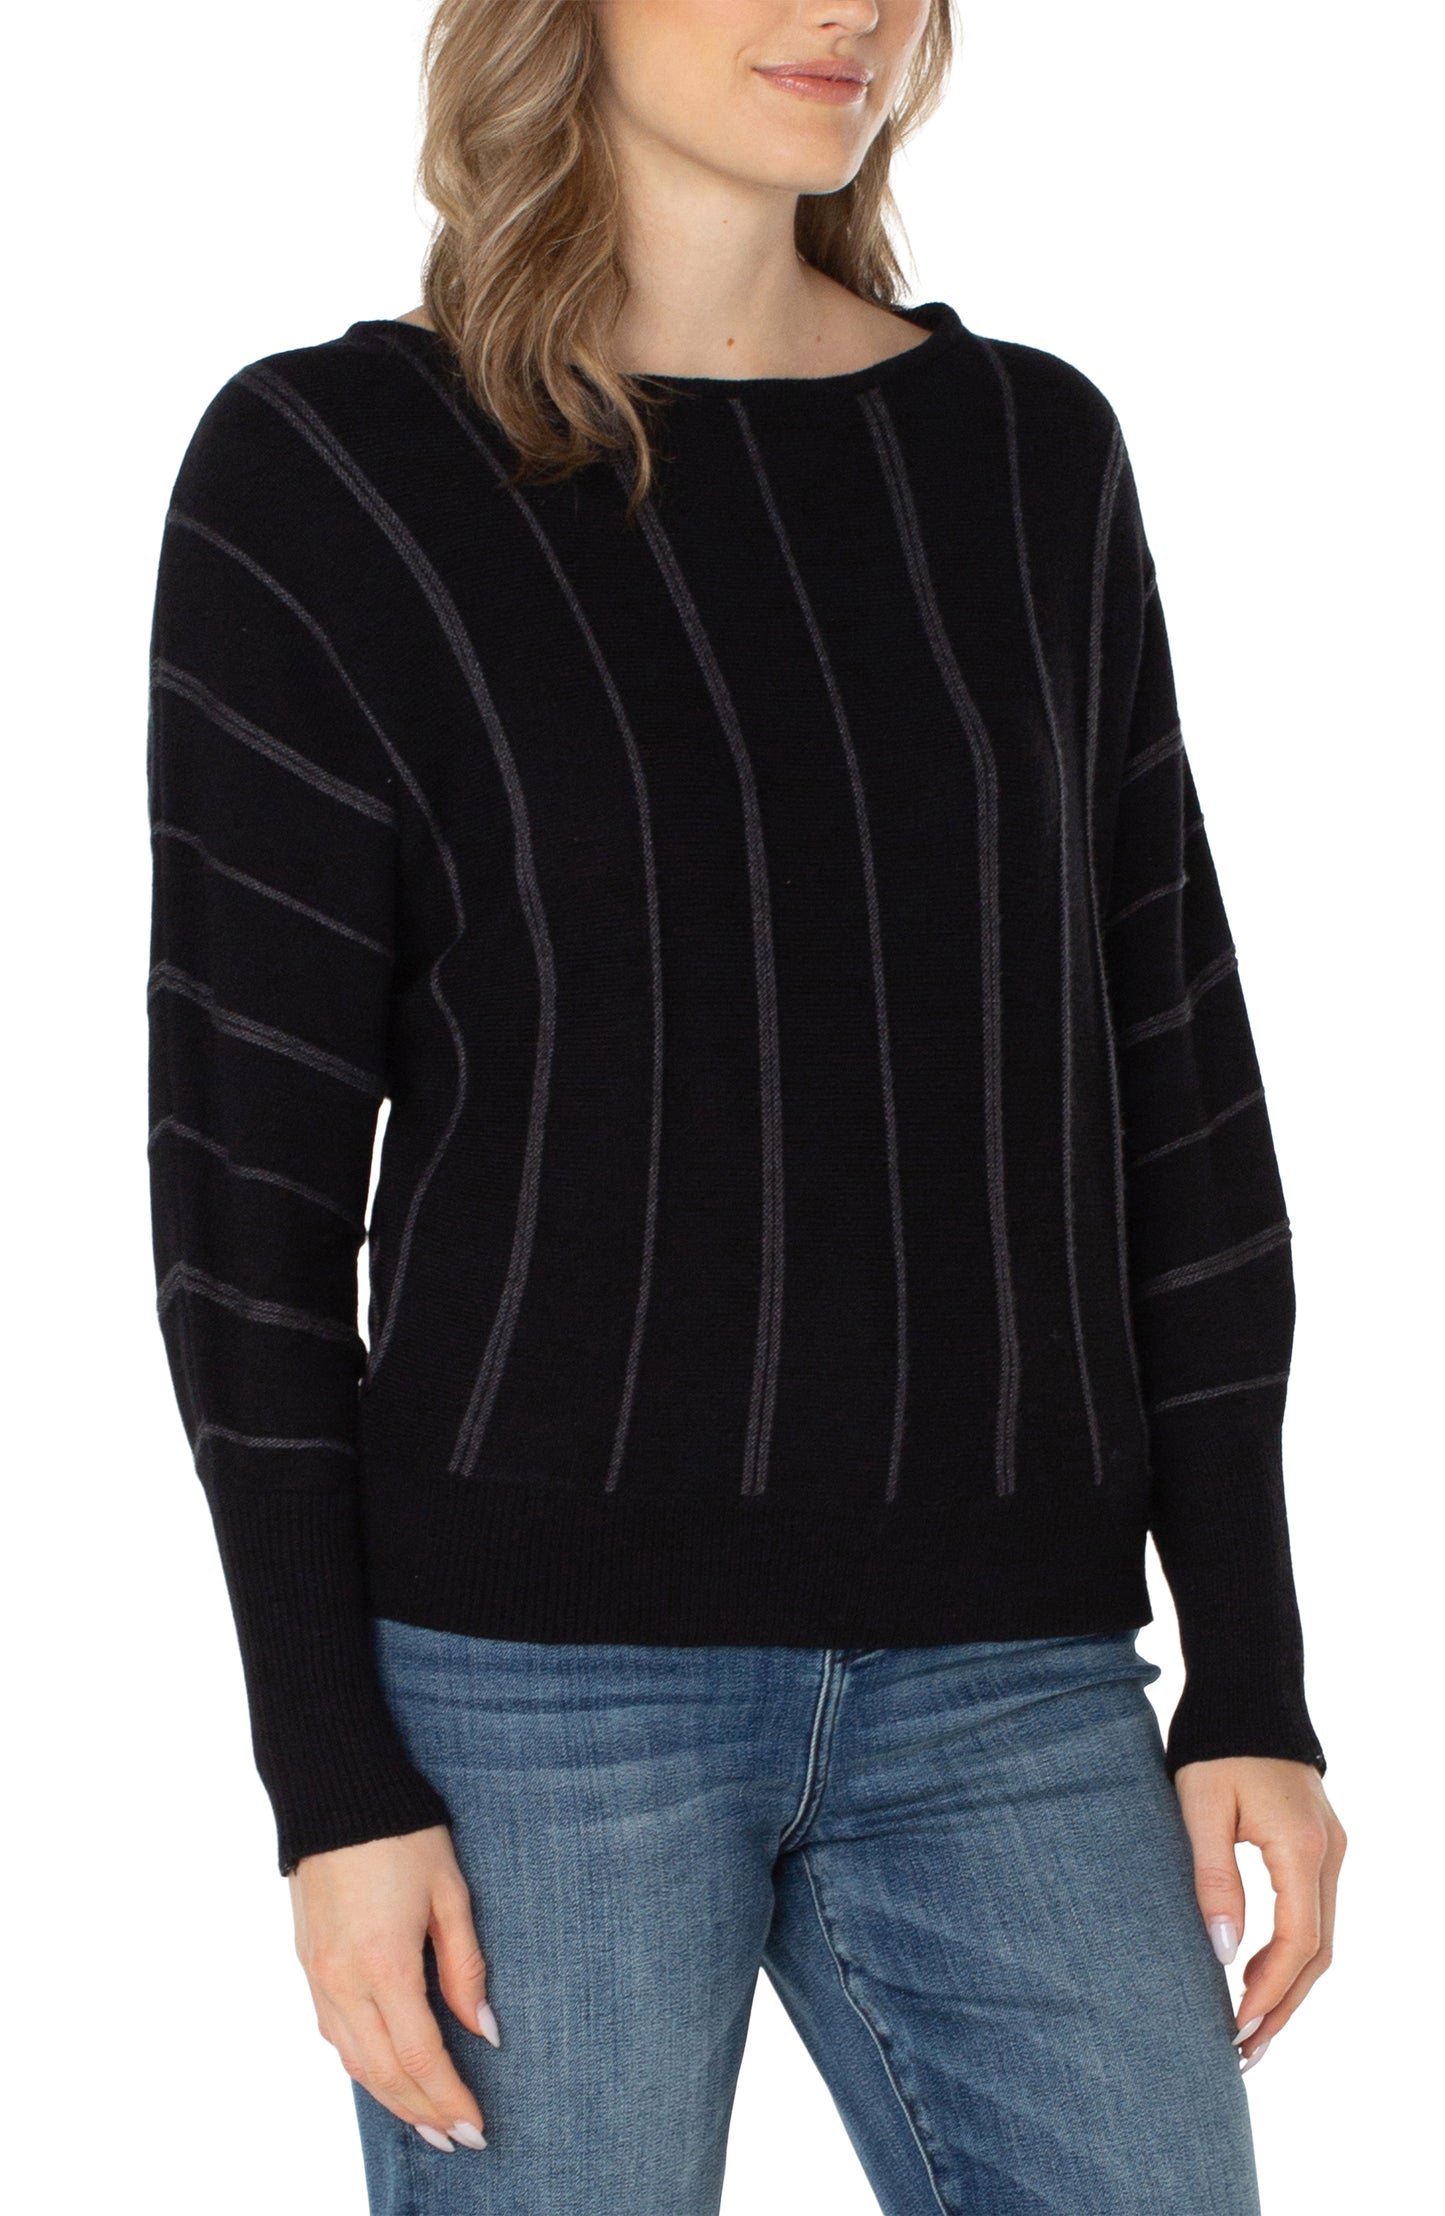 LIVERPOOL LONG SLEEVE DOLMAN SWEATER WITH STRIPES